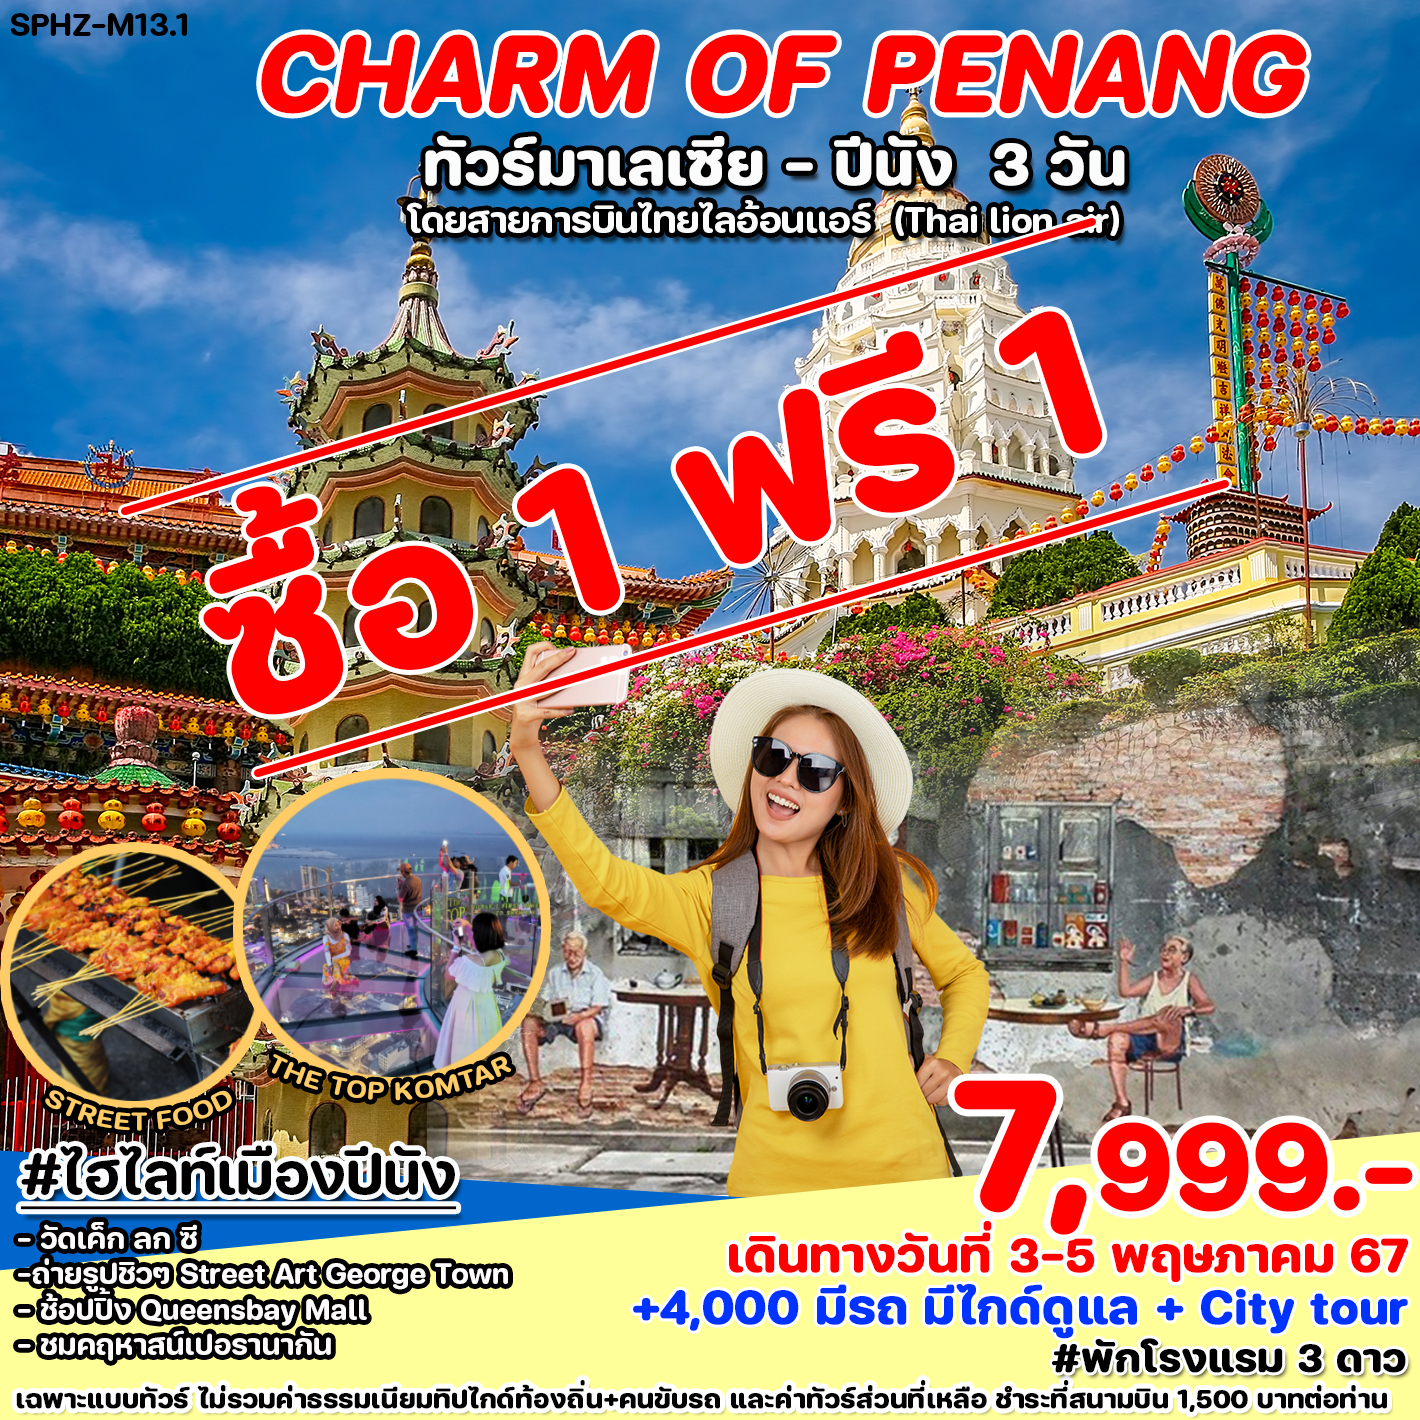 PACKAGE THE CHARM OF PENANG 3 วัน 2 คืน by THAI LION AIR